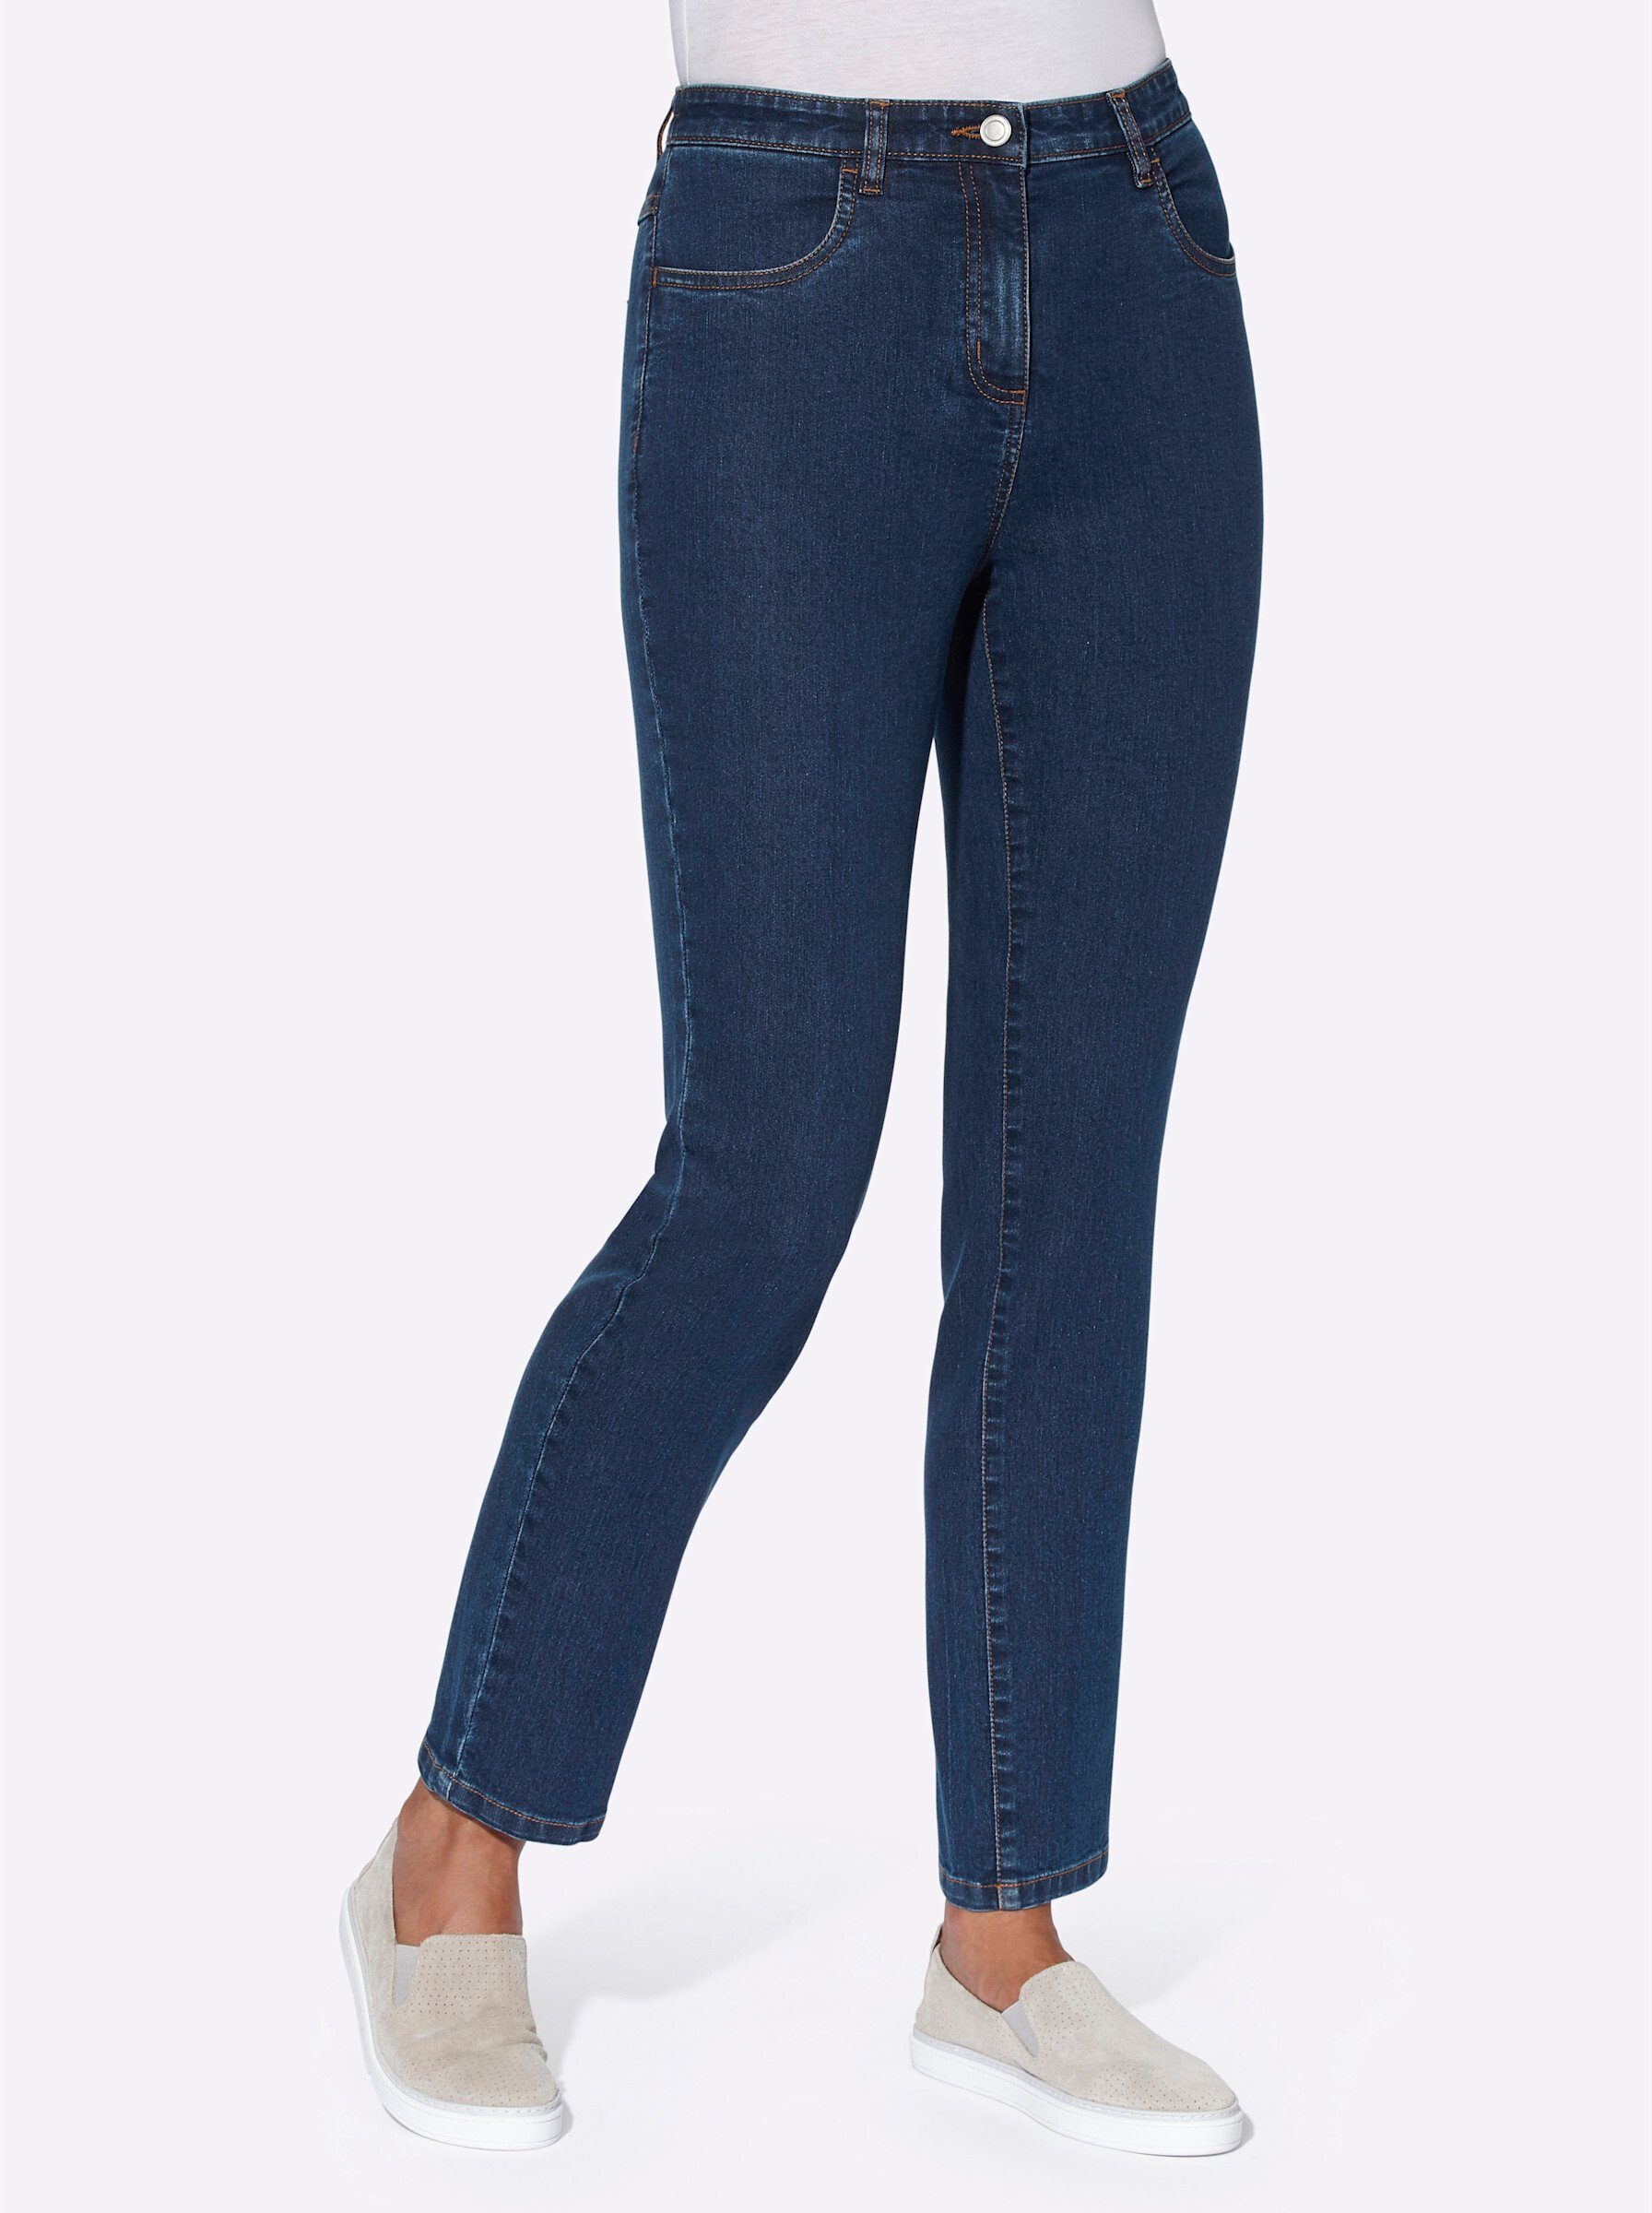 Sieh an! Bequeme Jeans blue-stone-washed